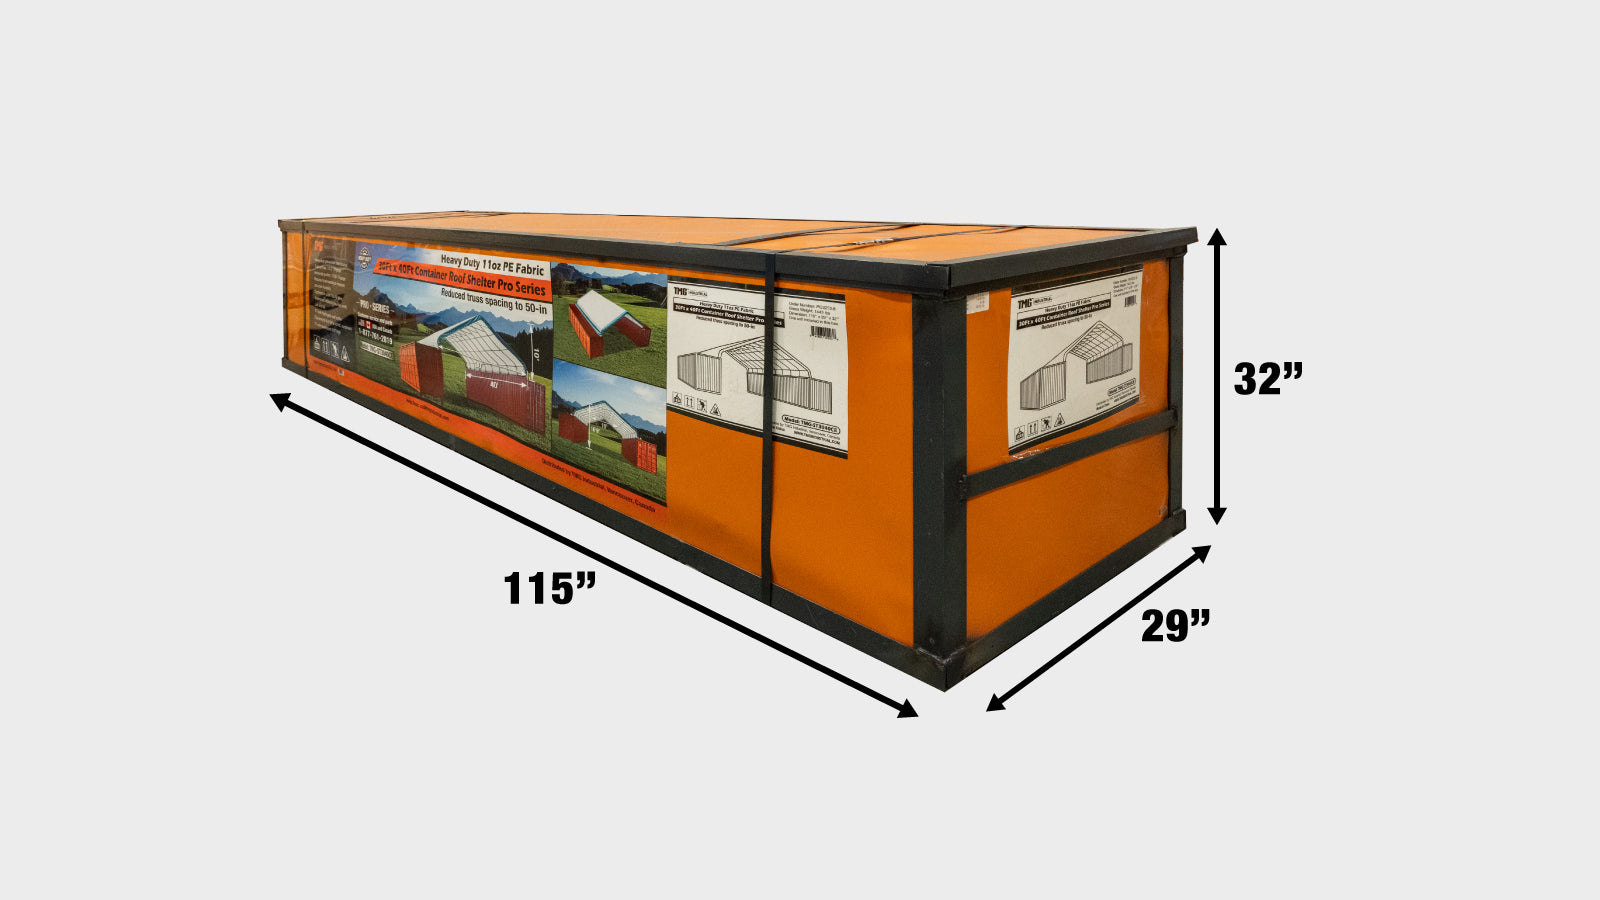 TMG Industrial 30' x 40' PE Fabric Pro Series Container Peak Roof Shelter, Fire Retardant, Water Resistant, UV Protected, TMG-ST3041CE(Previously TMG-ST3040CE)-shipping-info-image